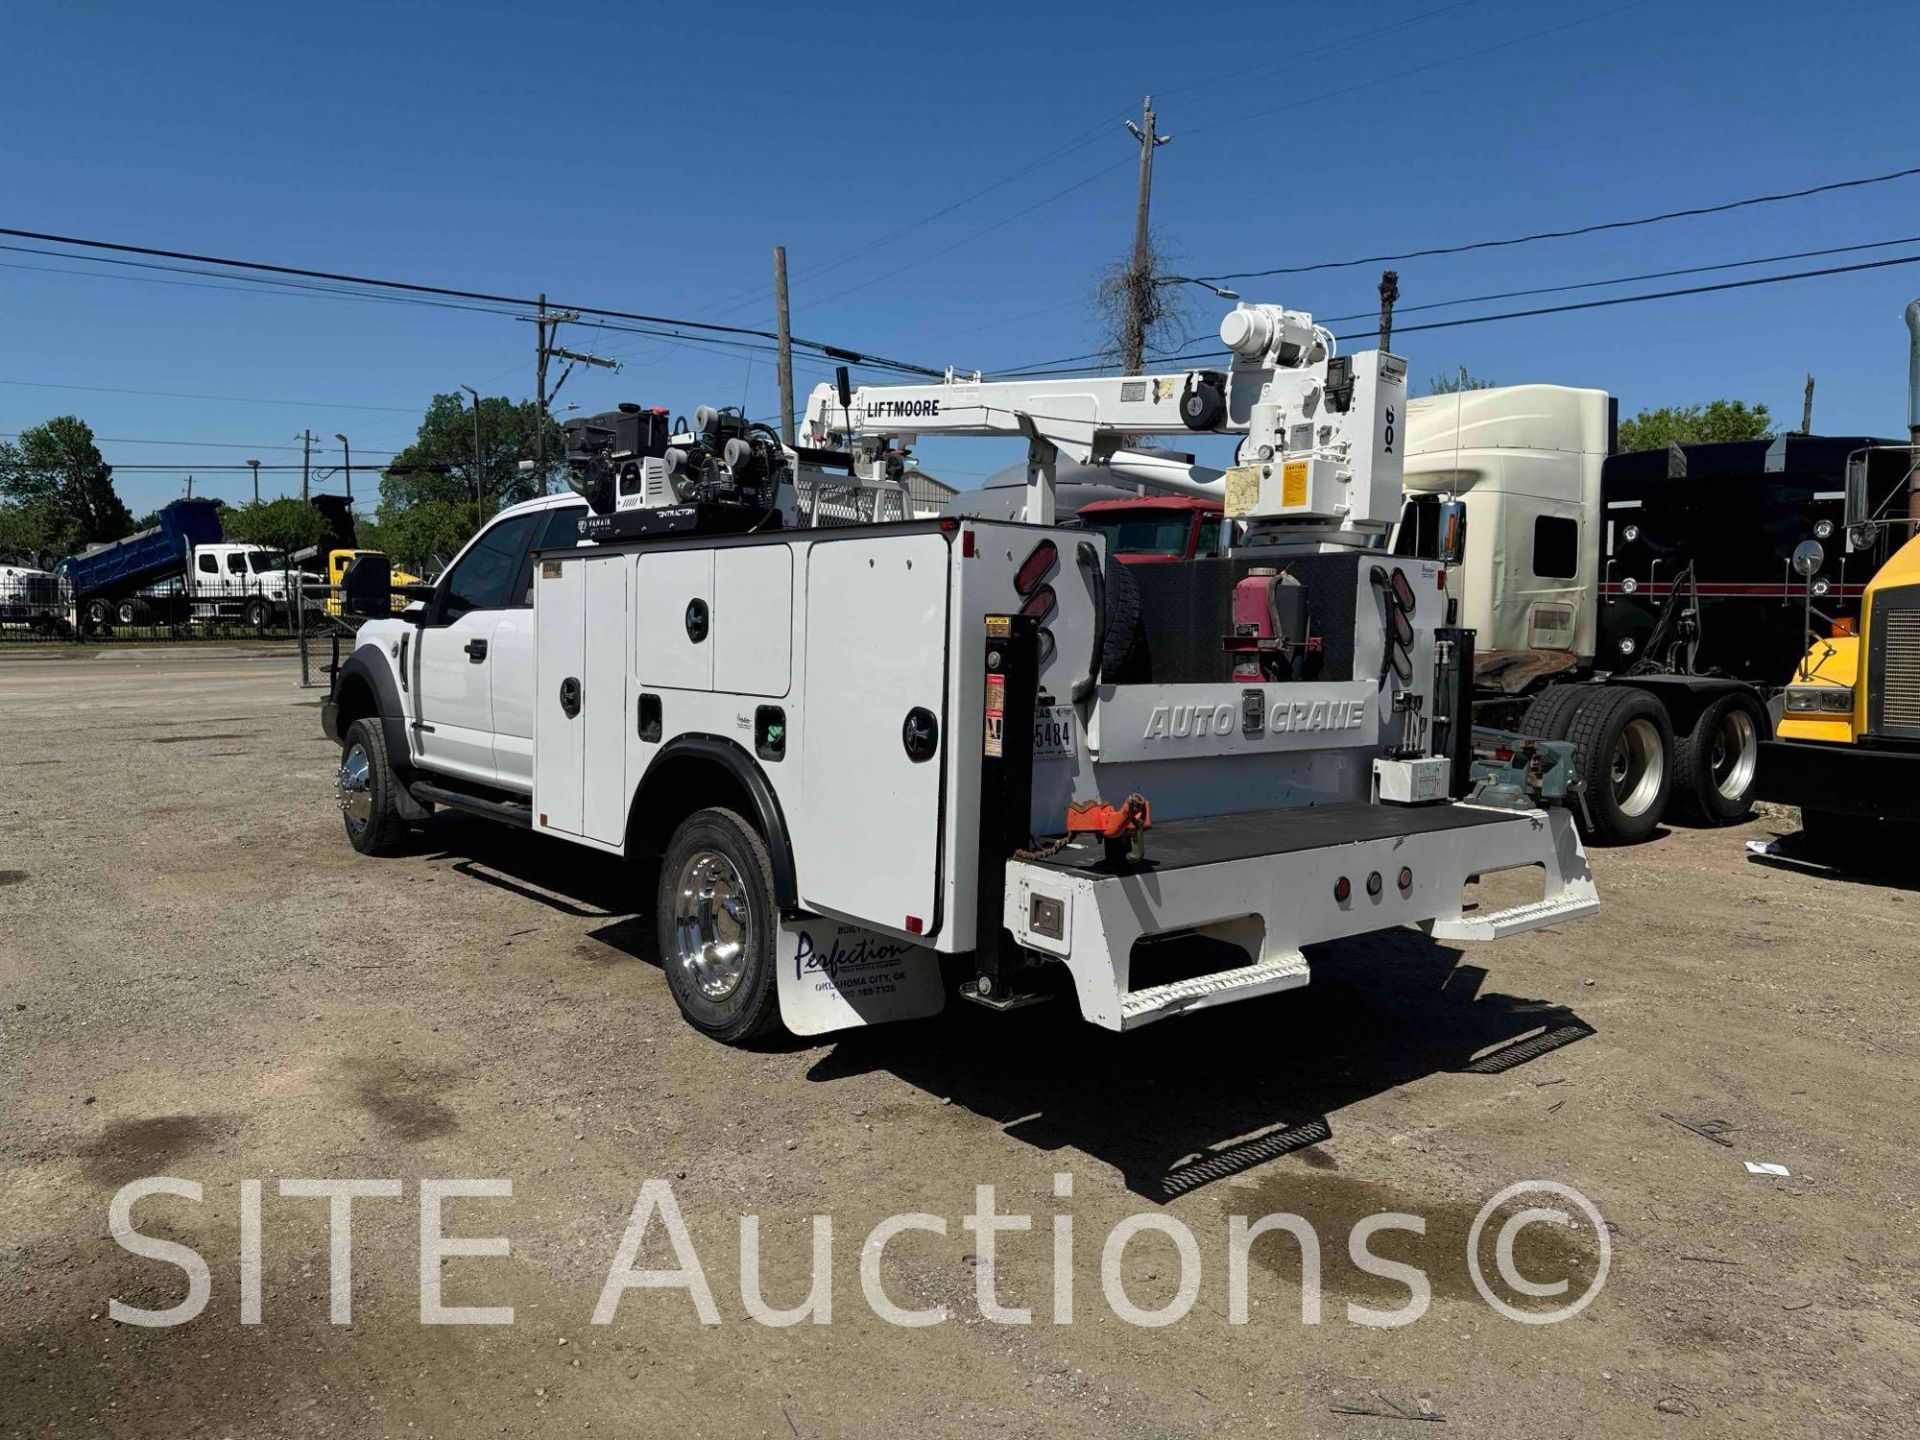 2018 Ford F450 SD Crew Cab Mechanic Truck - Image 10 of 45